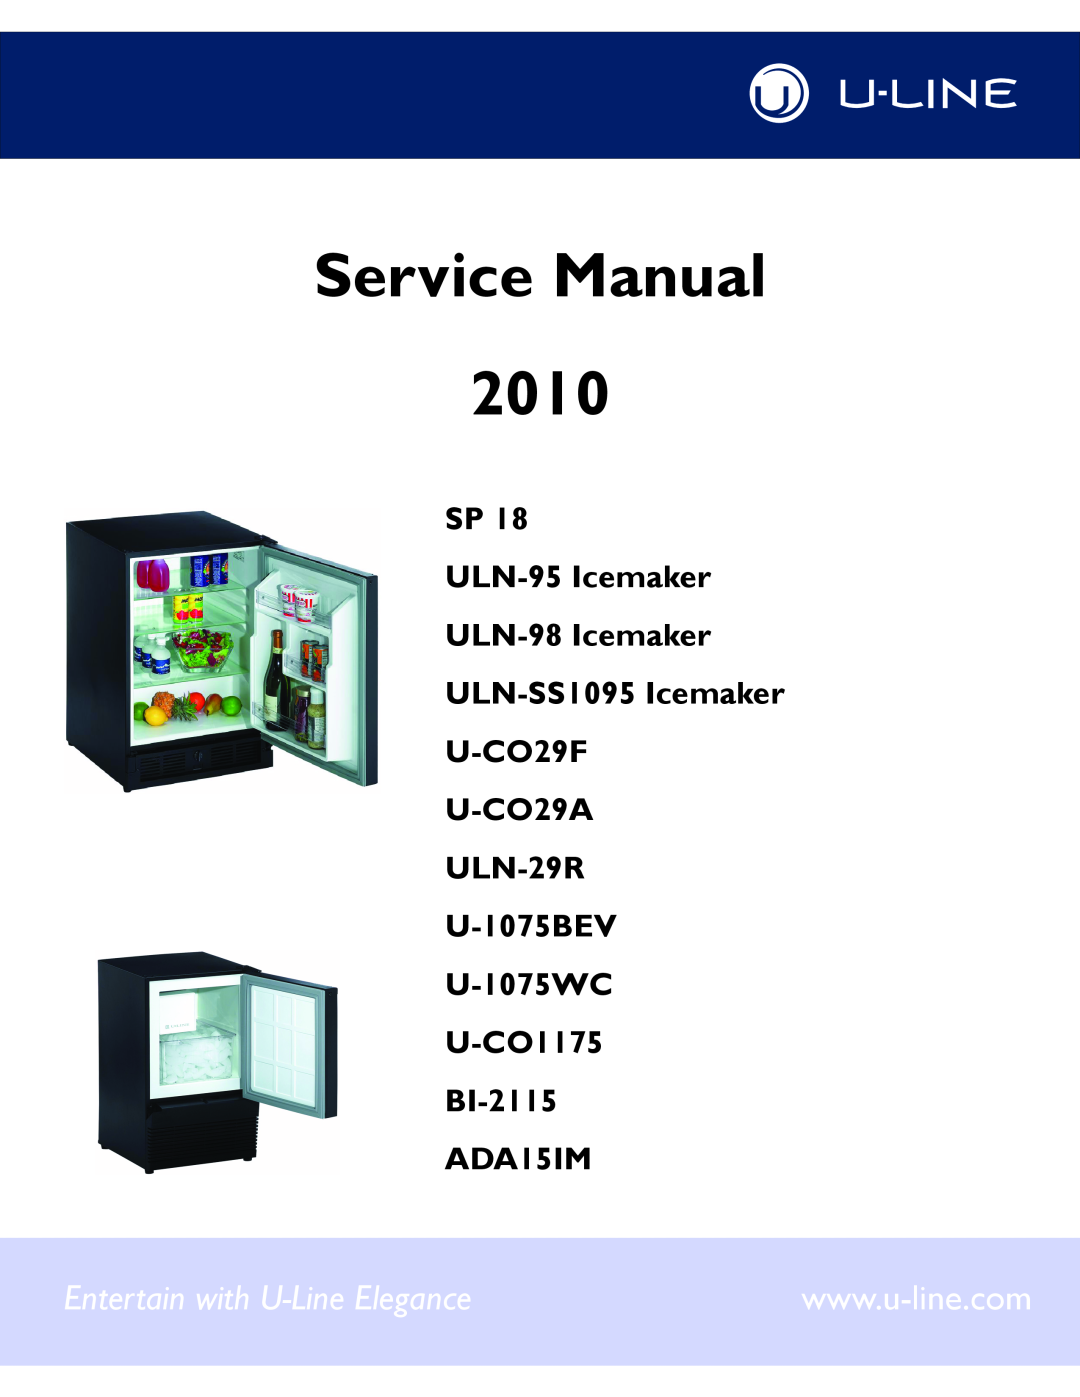 U-Line manual Quick Reference Guide, ADA15IM 15” Crescent Ice Maker ADA Series, Features & Benefits, Model Details 